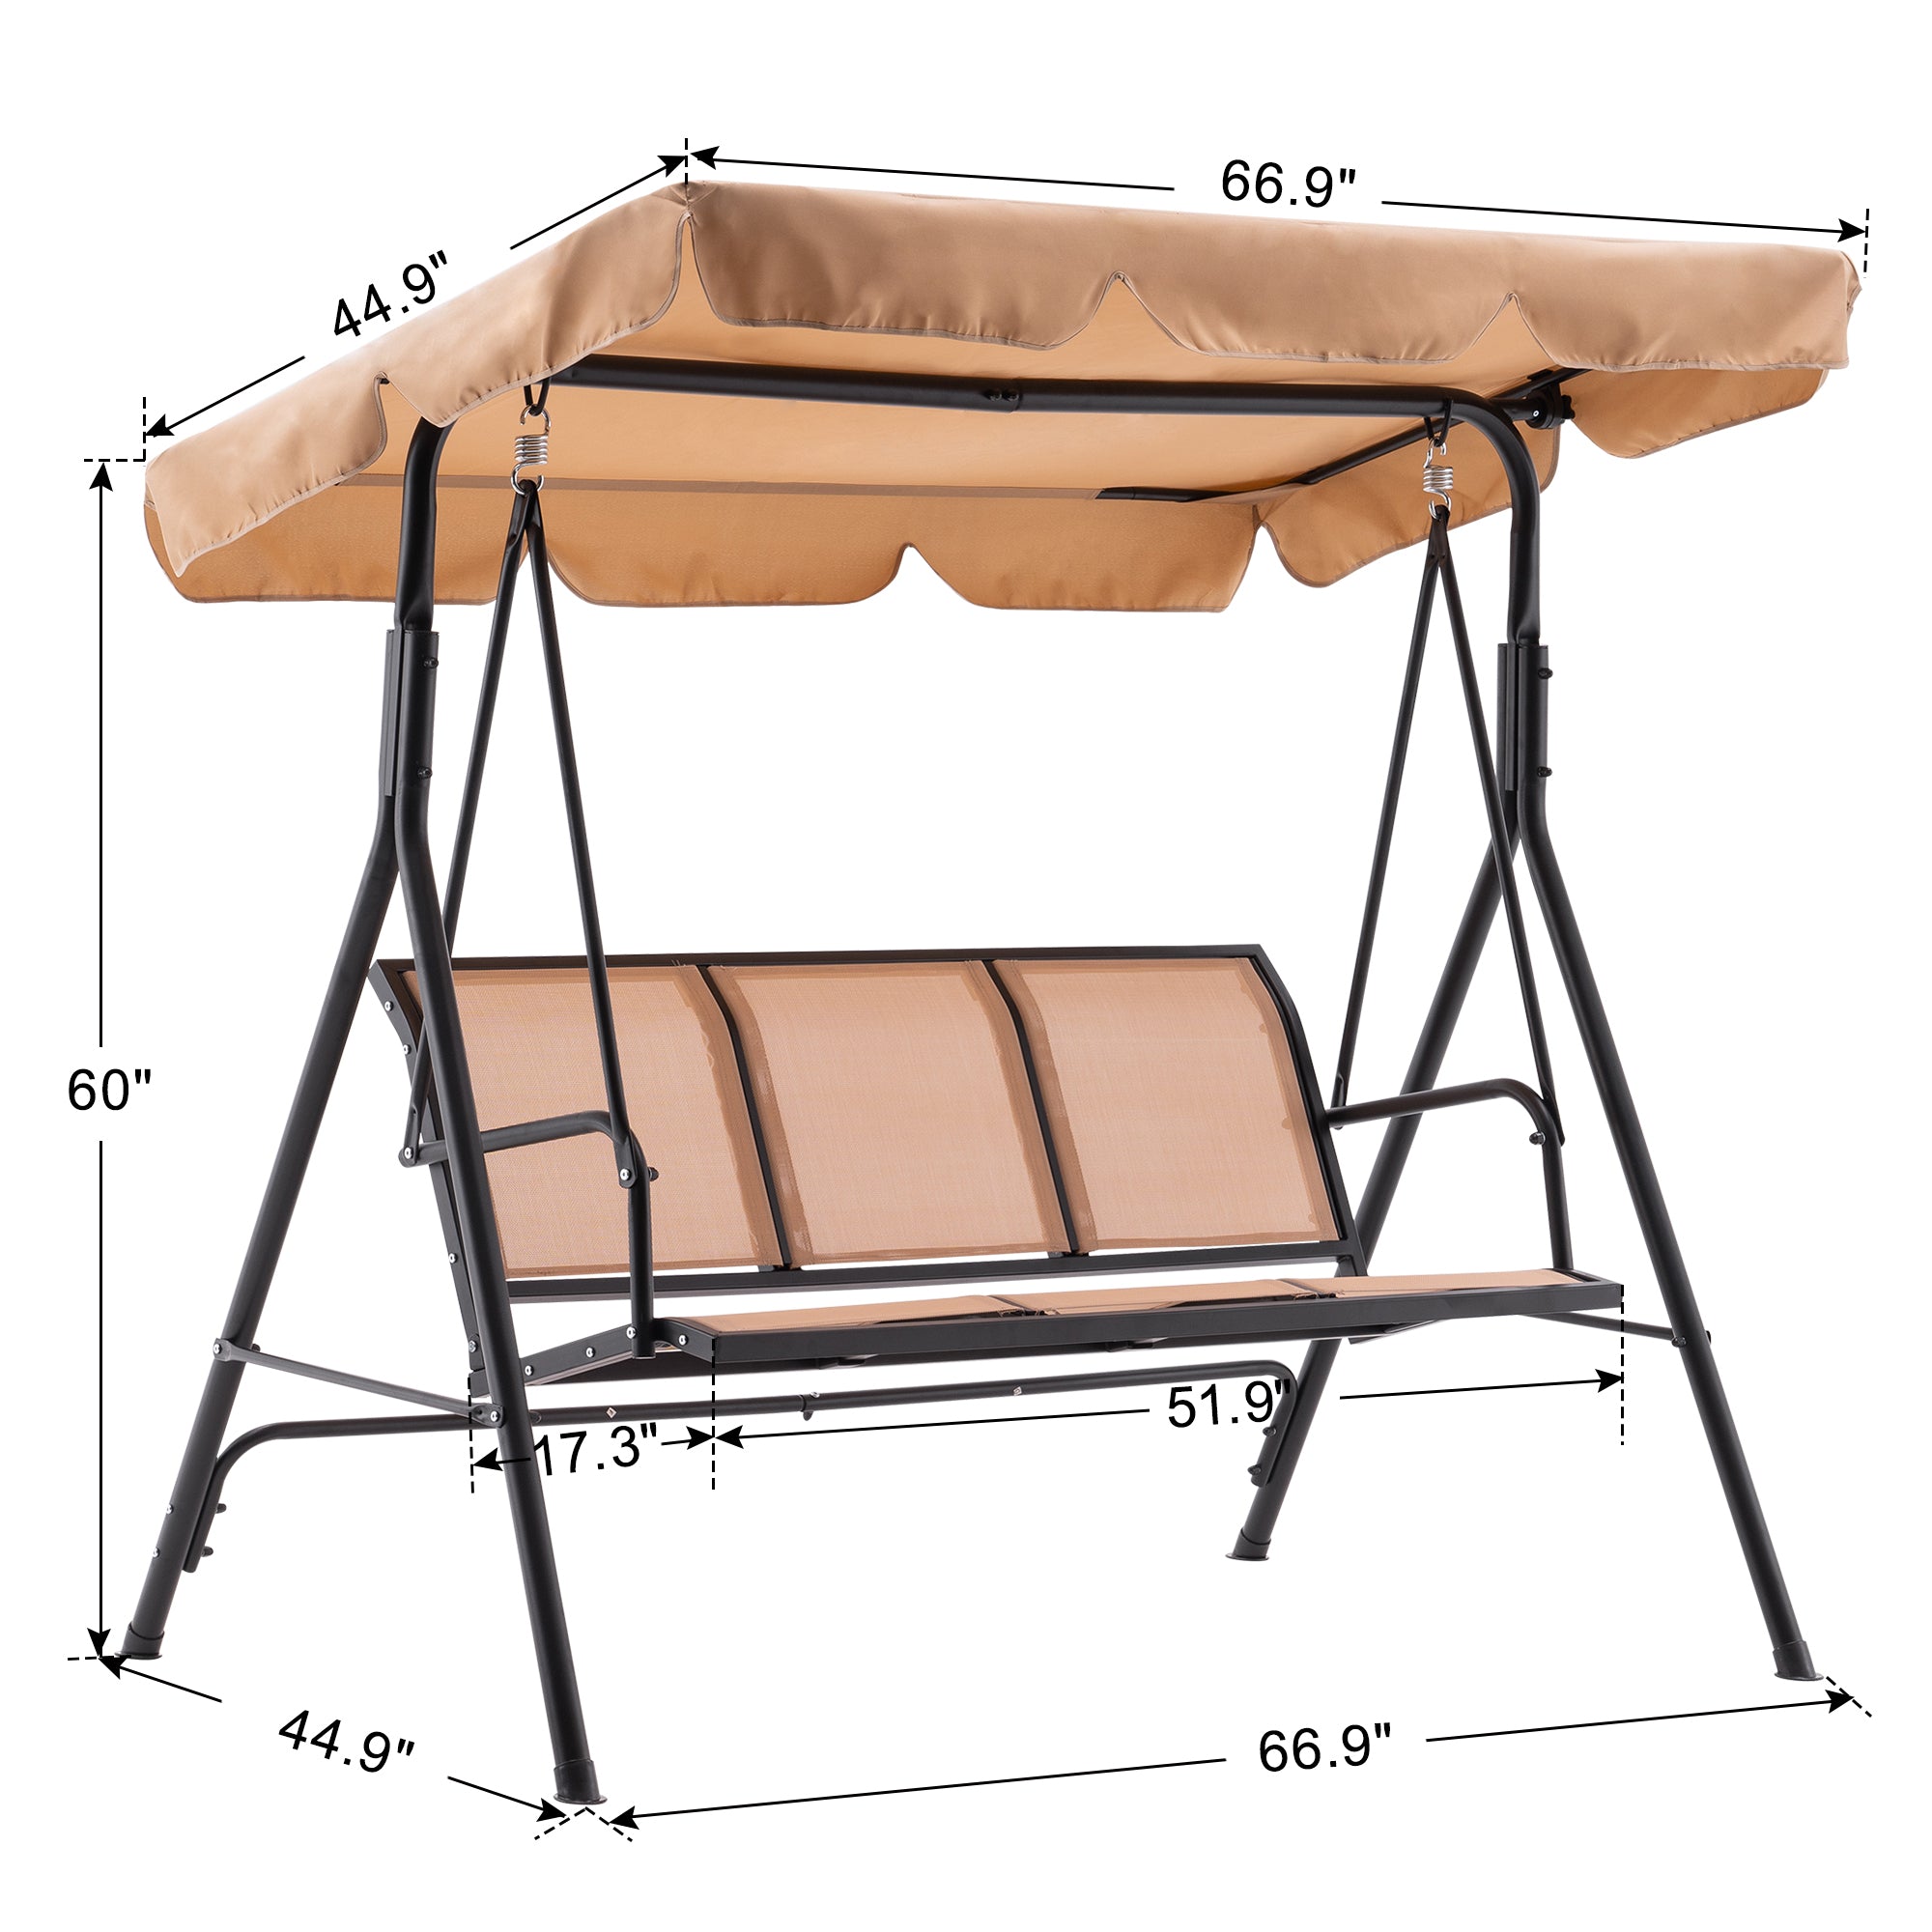 Mcombo Outdoor Patio Canopy Swing Chair 3-Person, Steel Frame Textilence Seats Swing Glider, 4507